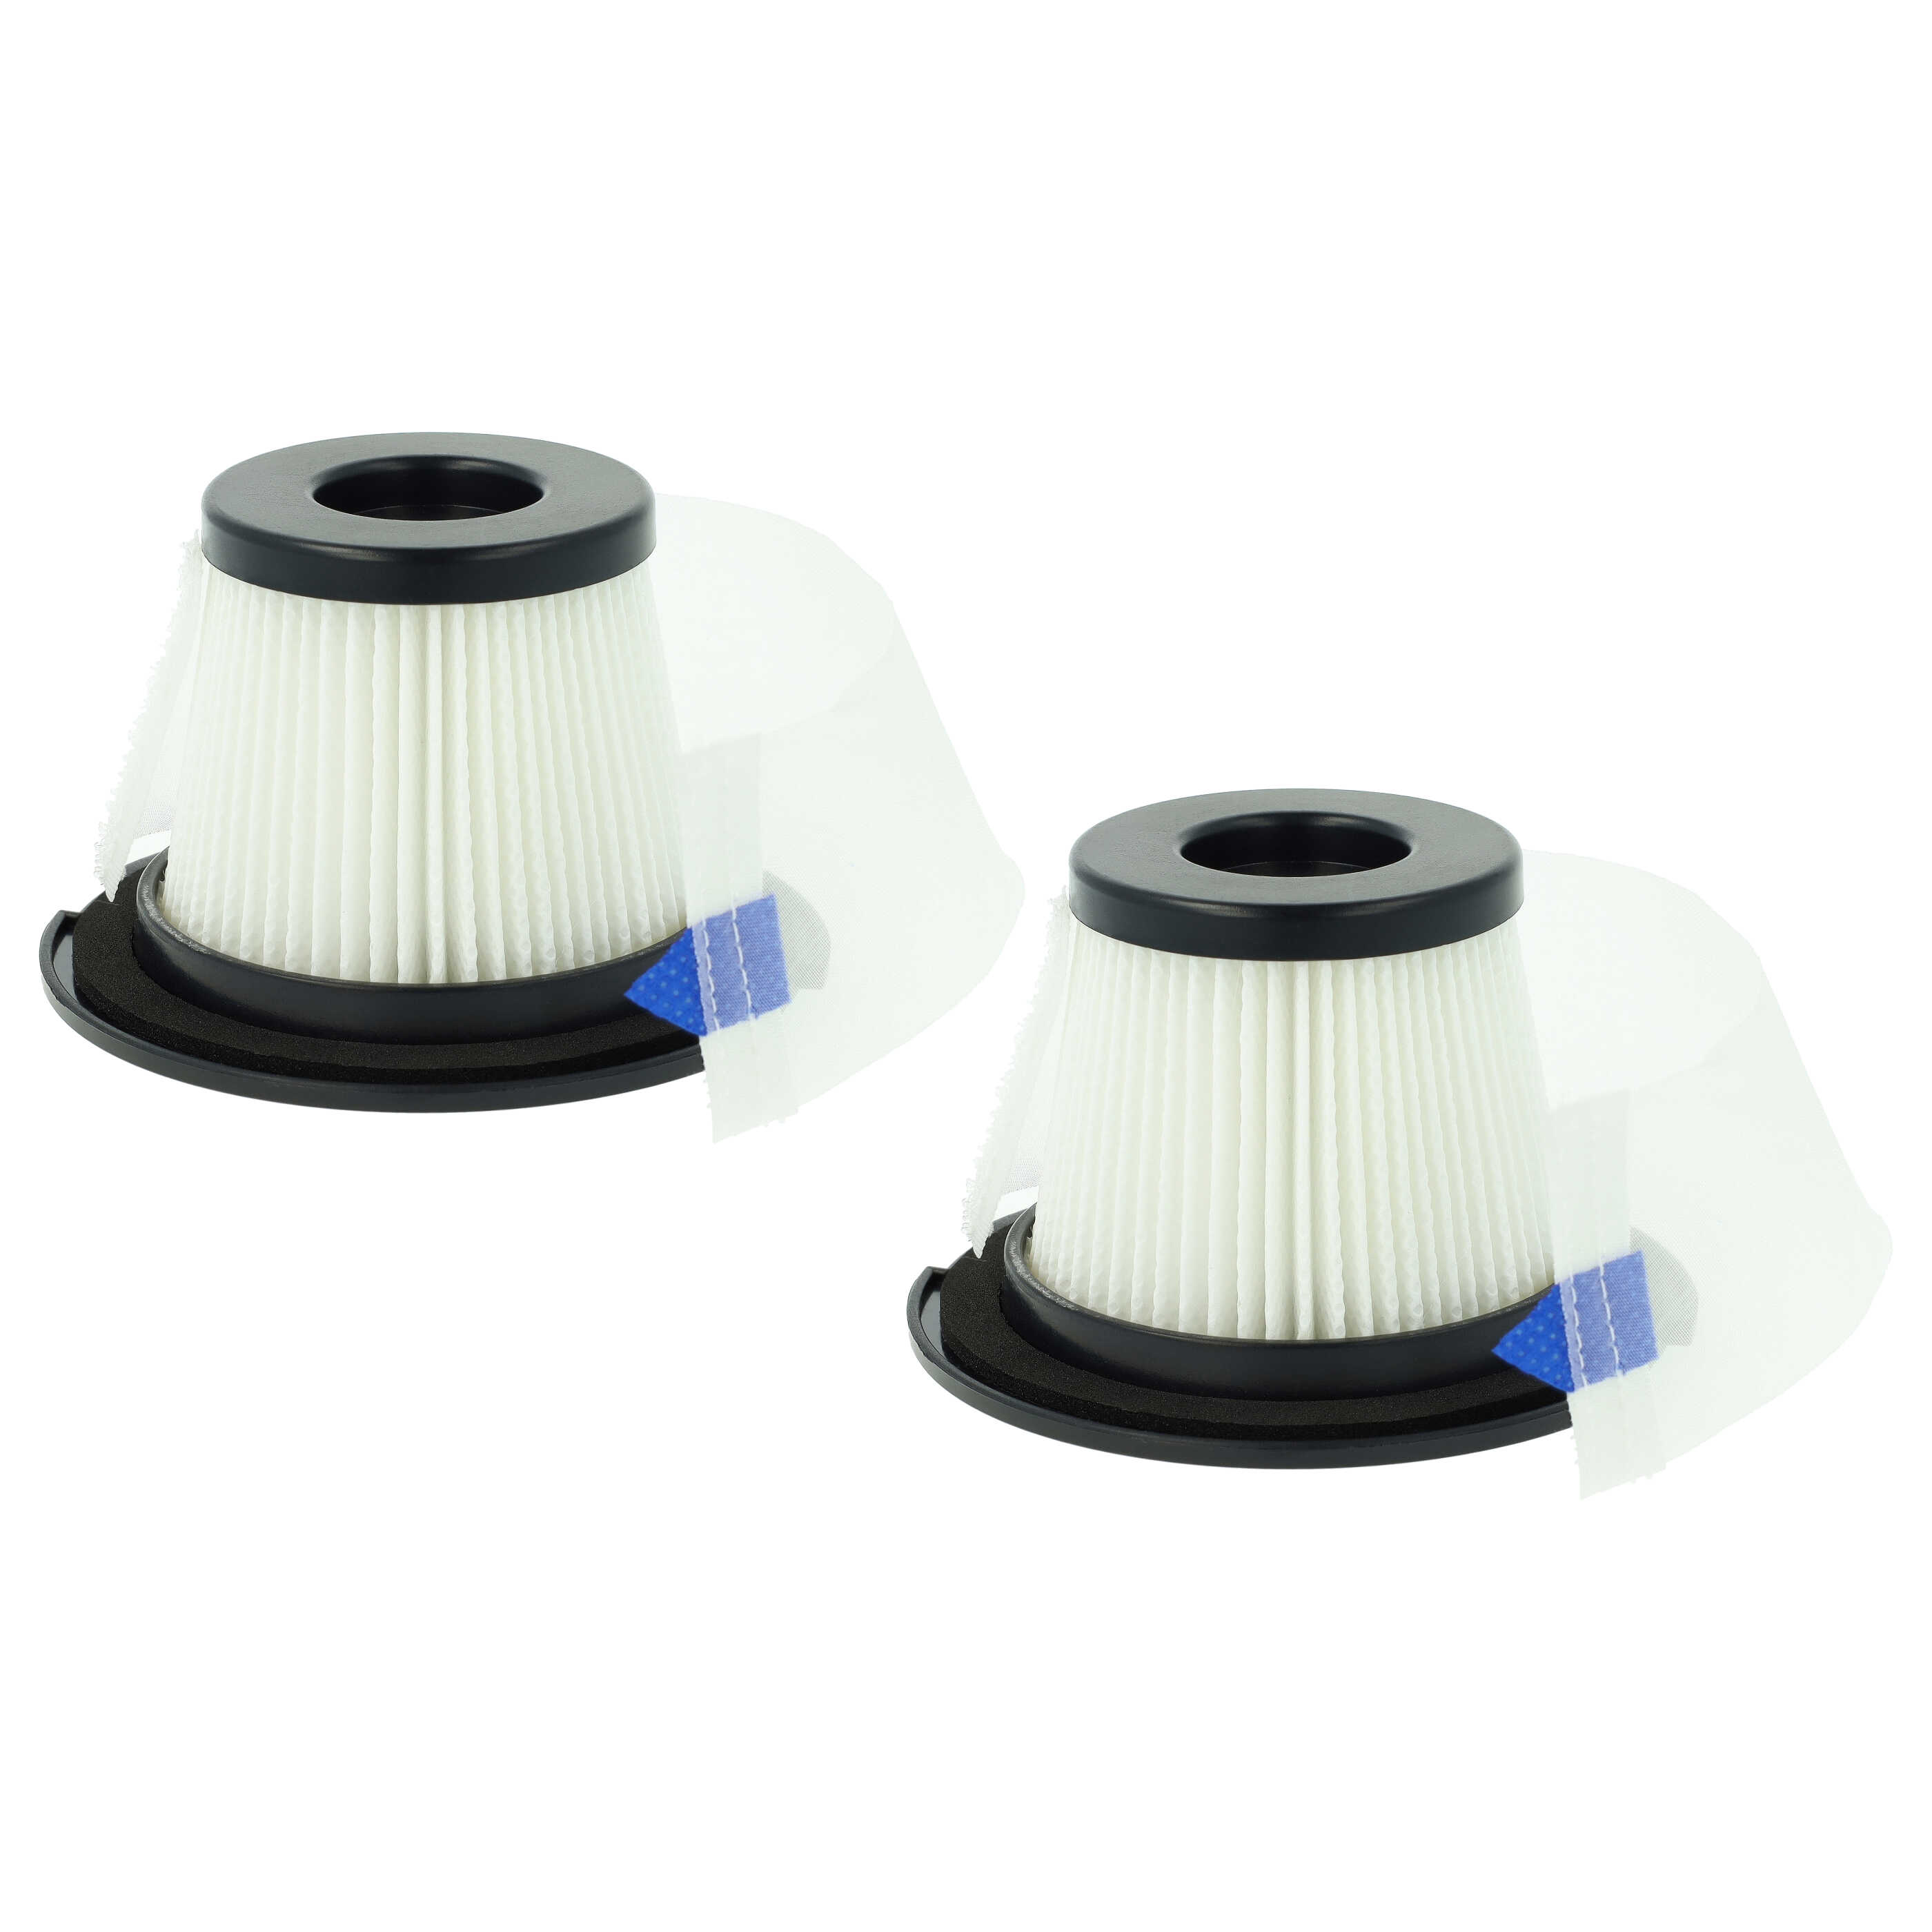 2x filter suitable for Clean Butler 4G Silent 10033762, Clean Butler 4G Silent 10033763, K17, UVC-122311.3 Kla